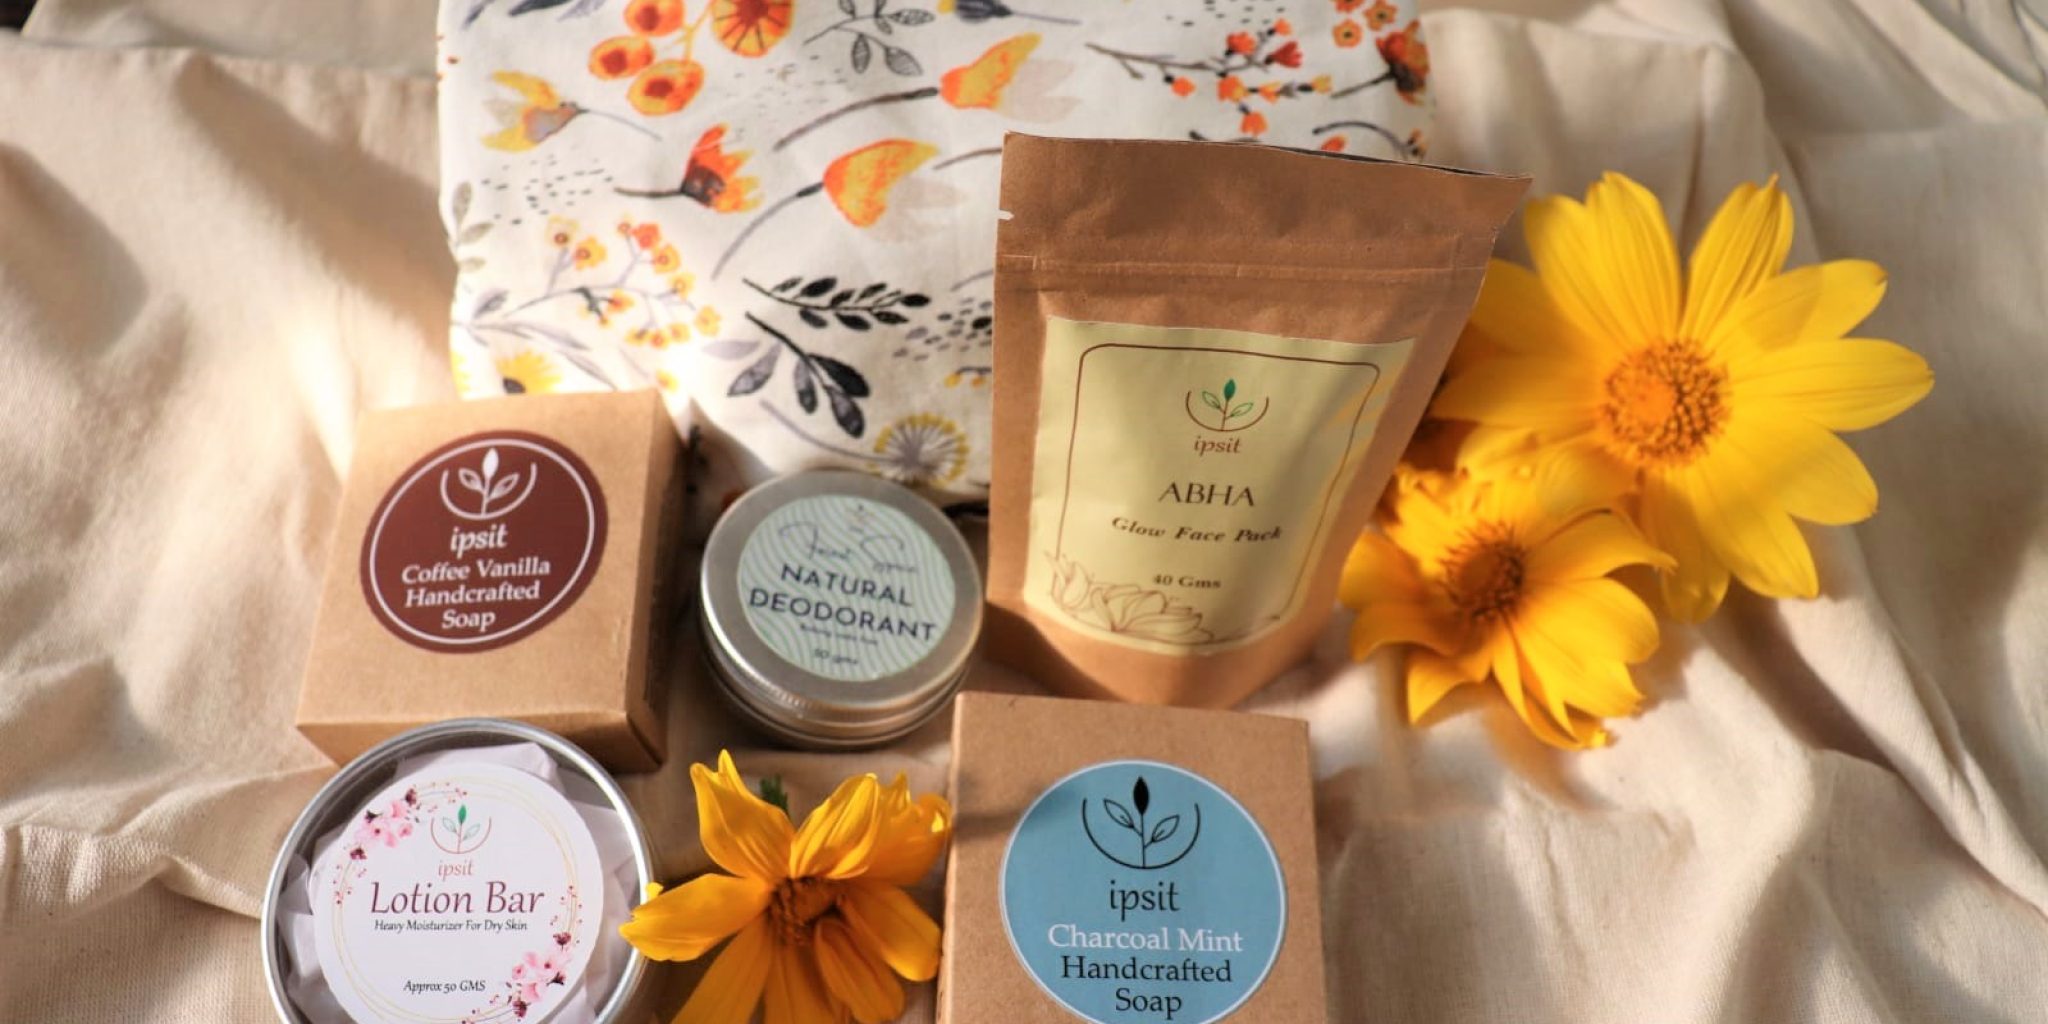 The sustainable body care hamper